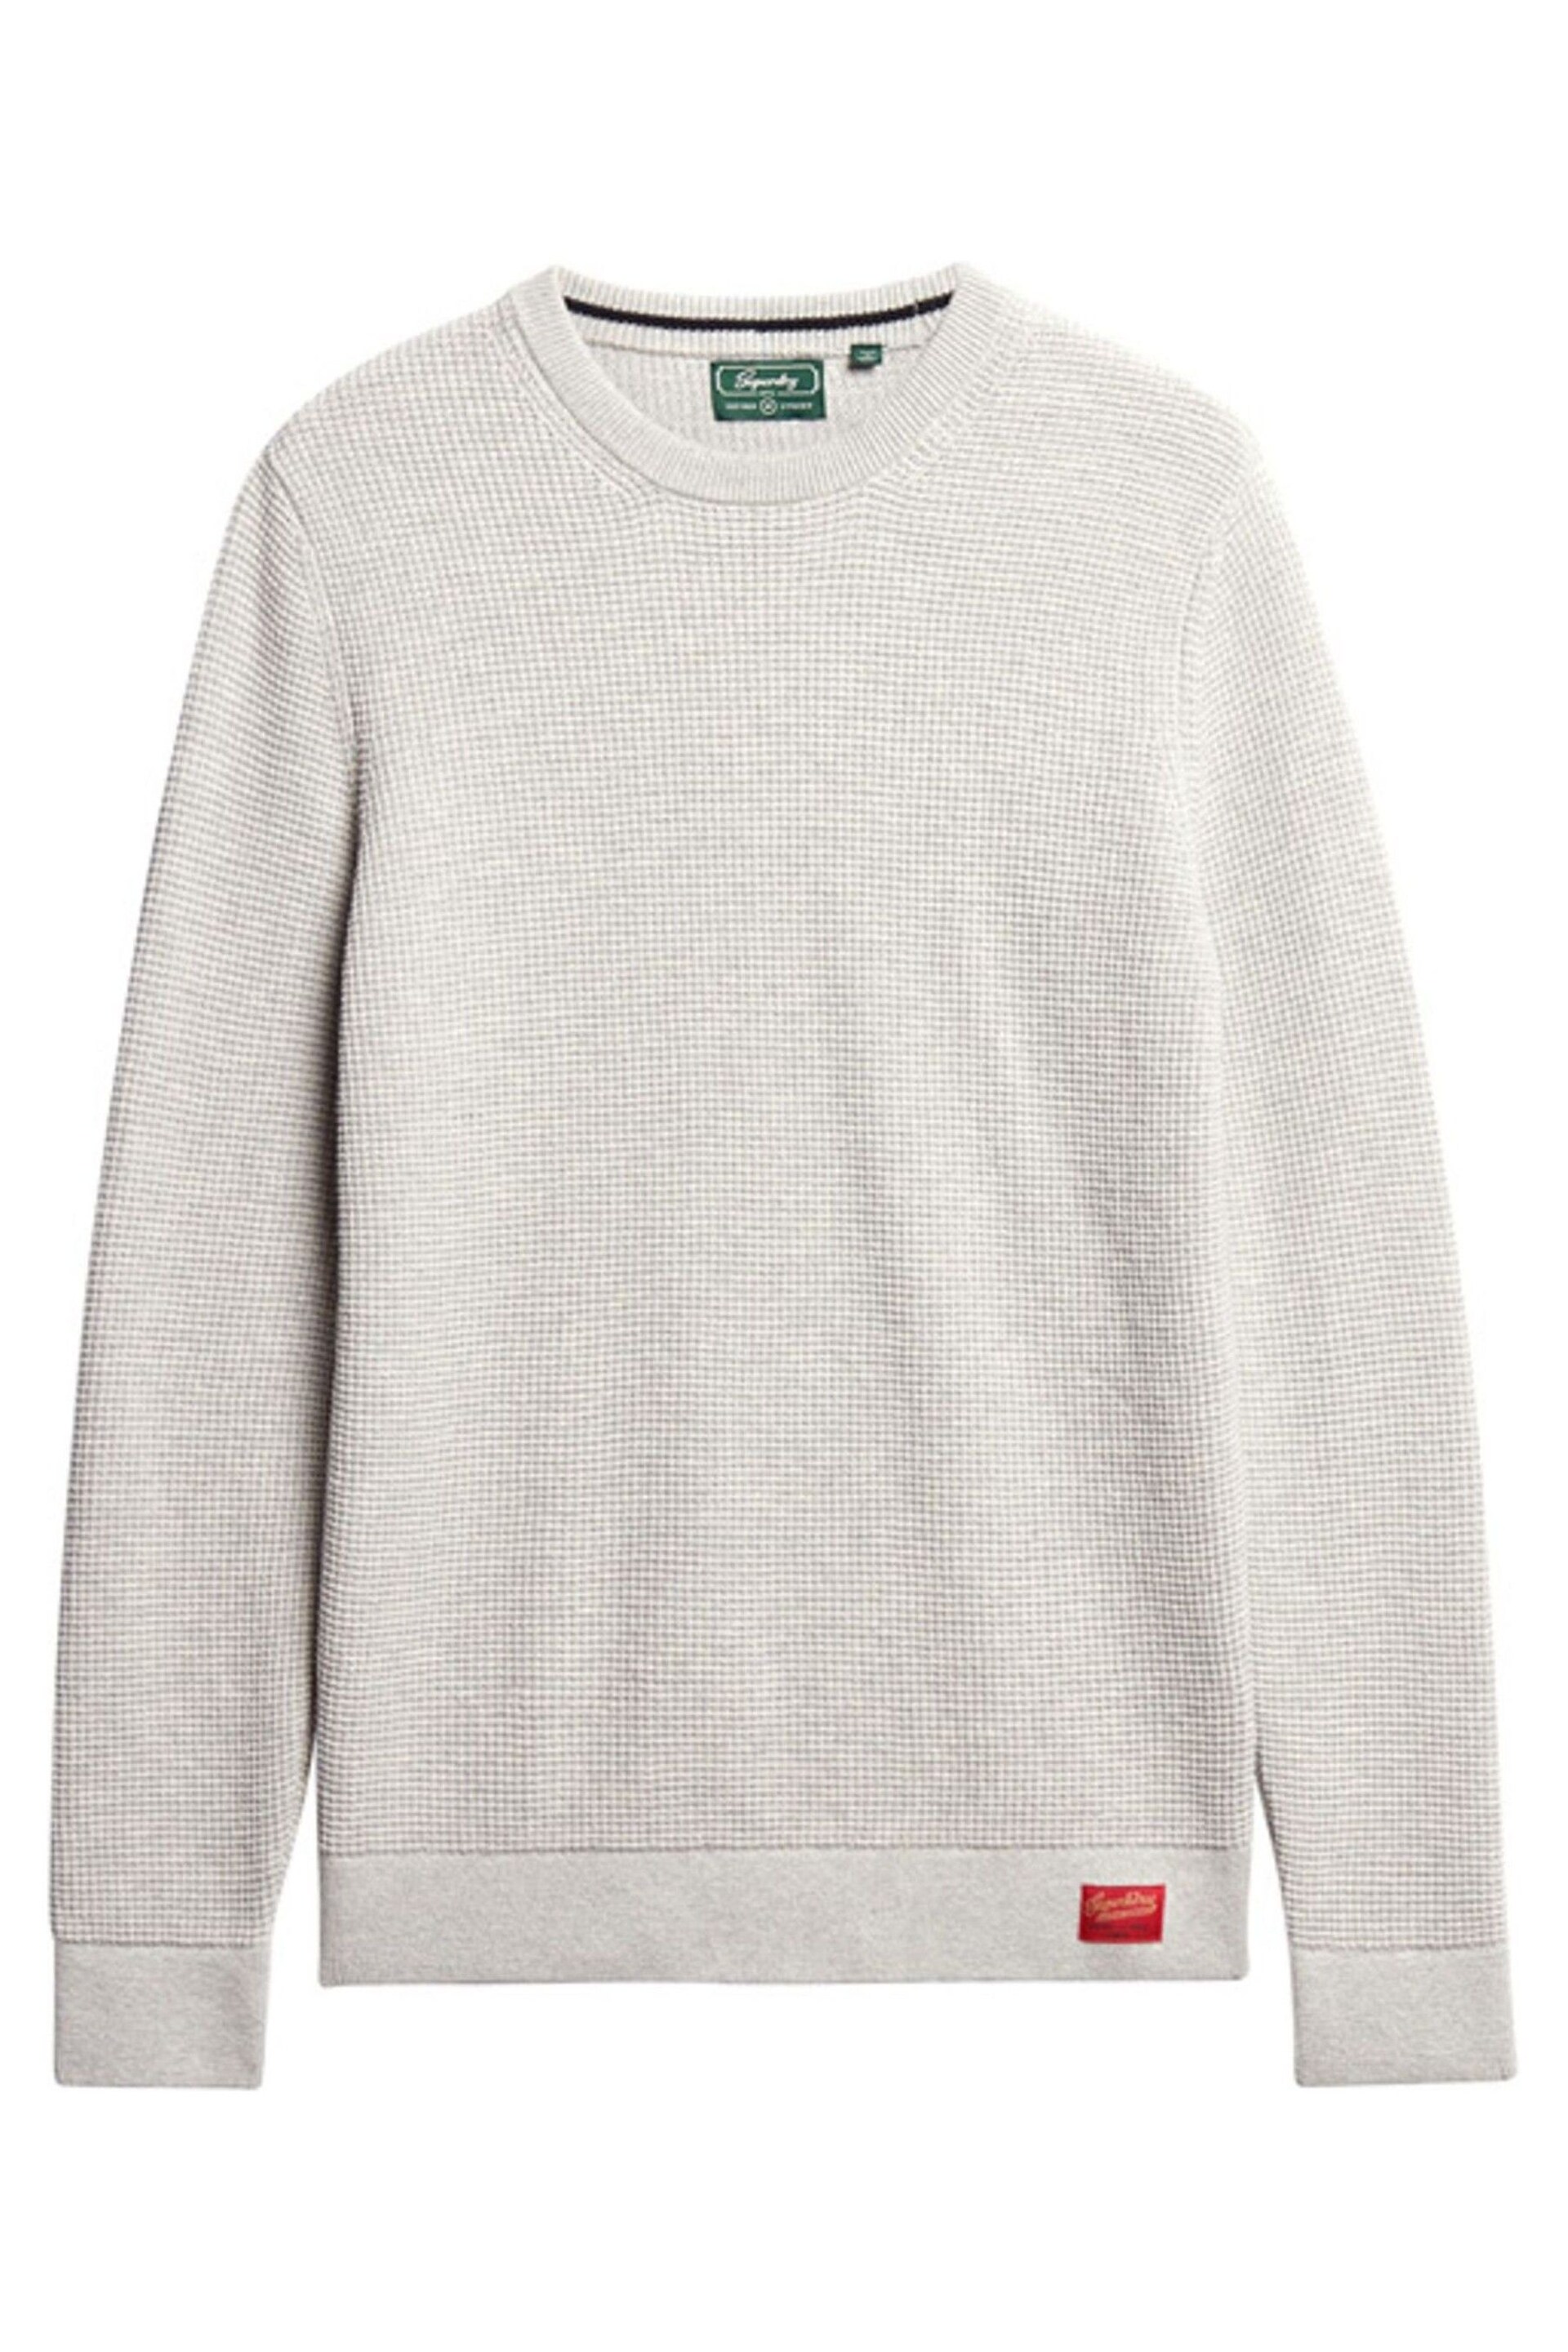 Superdry Grey Textured Crew Knit Jumper - Image 1 of 3